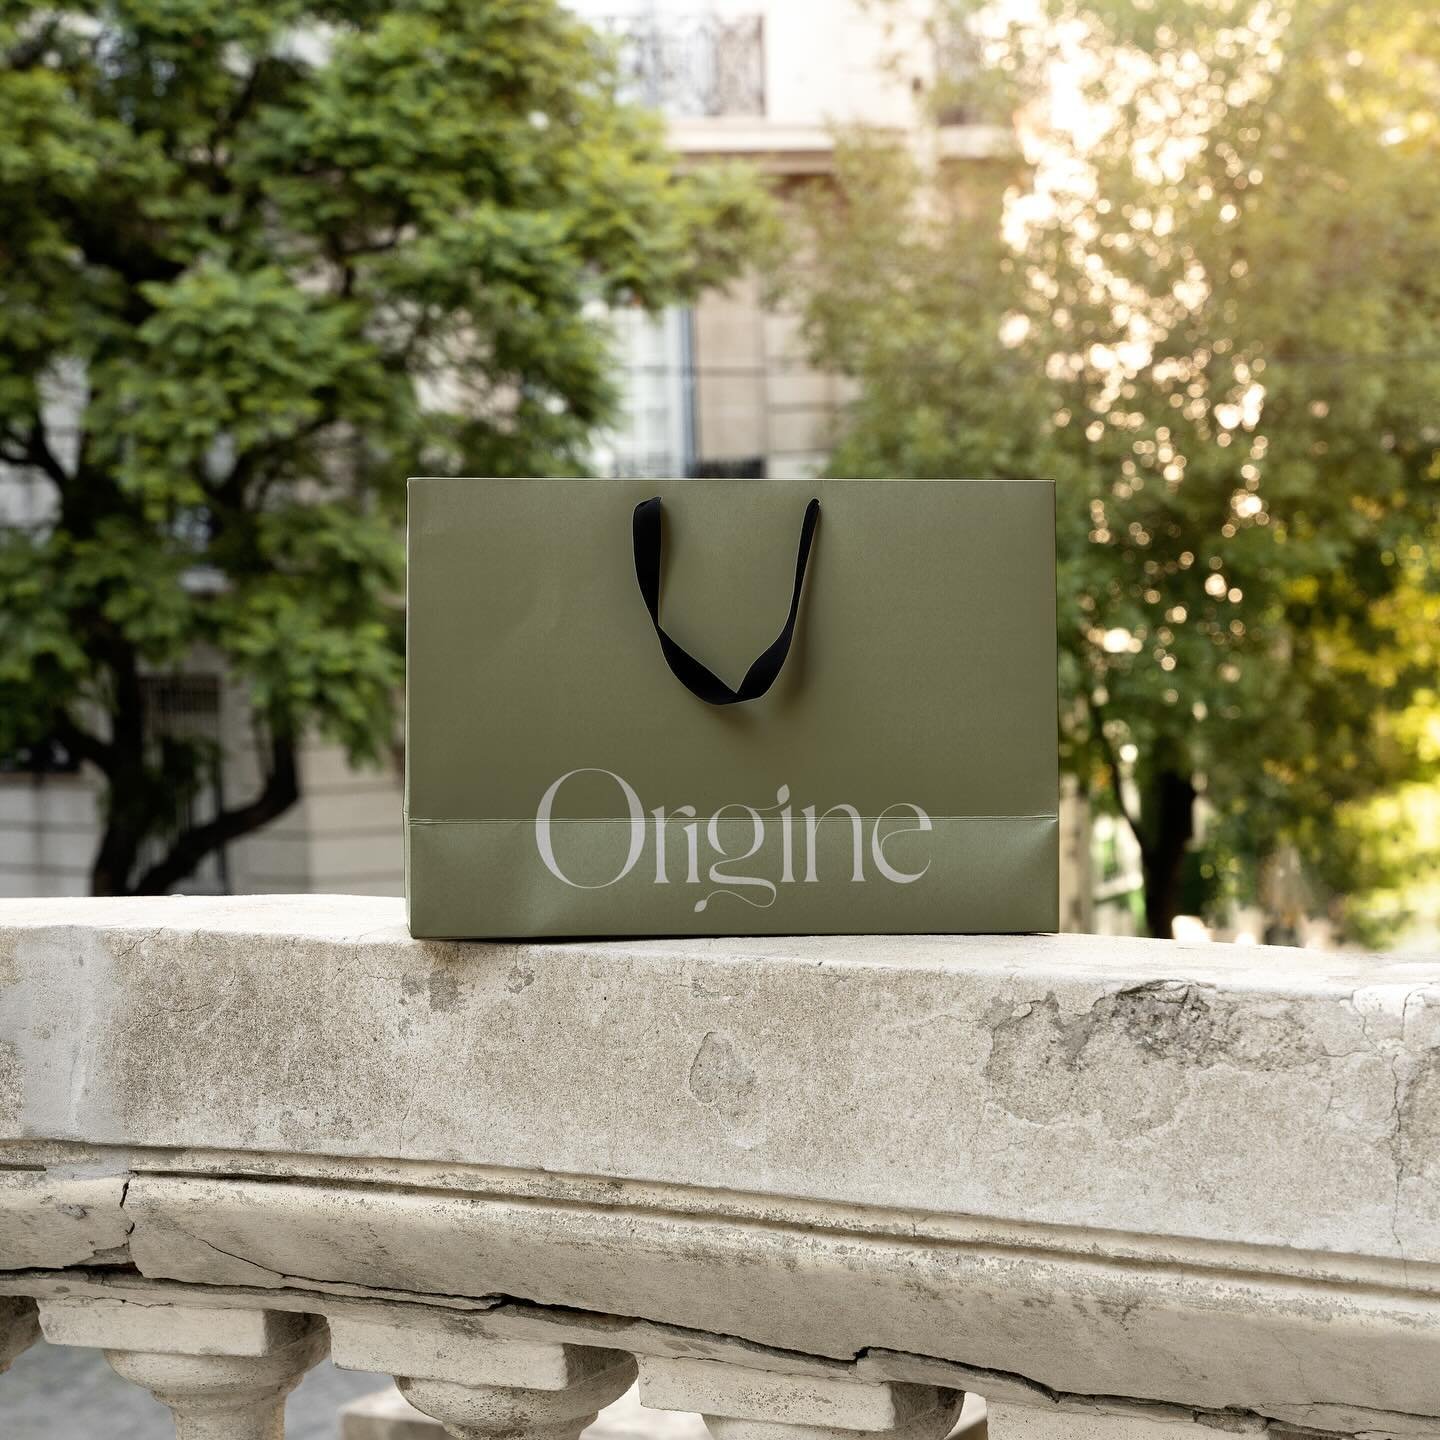 Introducing Origine, back to source✨ where authenticity meets holistic well-being.

I chose to subtly costumise the letter g as it&rsquo;s representing the center 🍃 

New Branding Reveal | In the essential oils and aromatherapy field, Origine commun